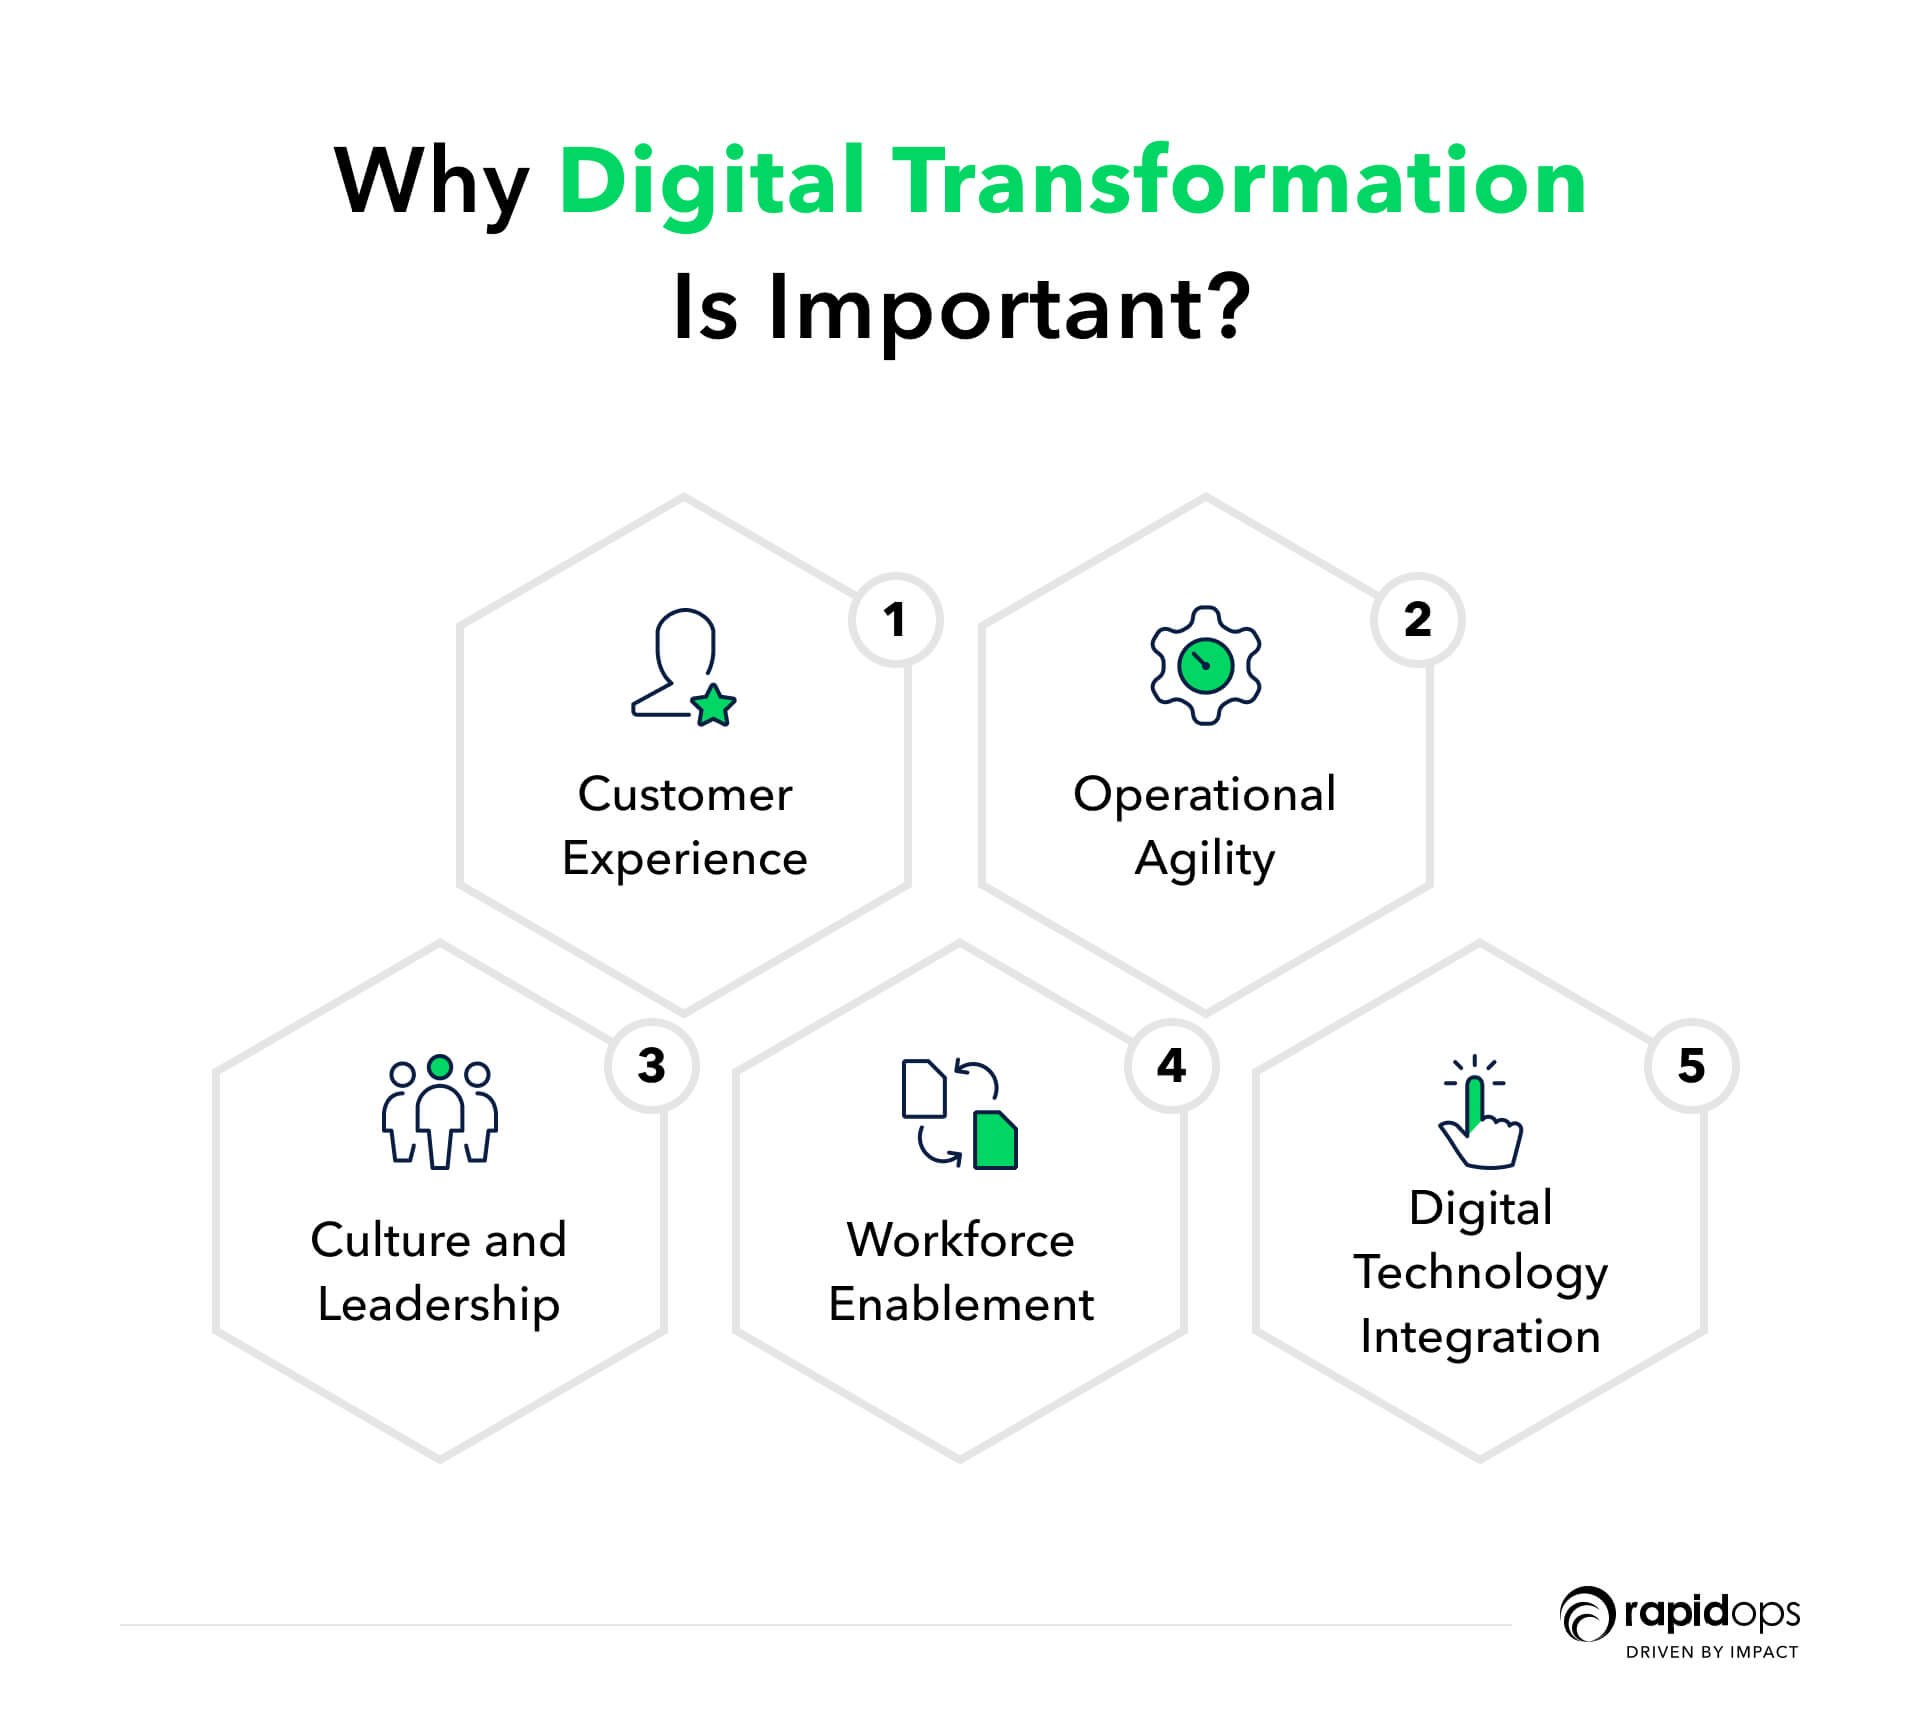 Why is digital transformation important?